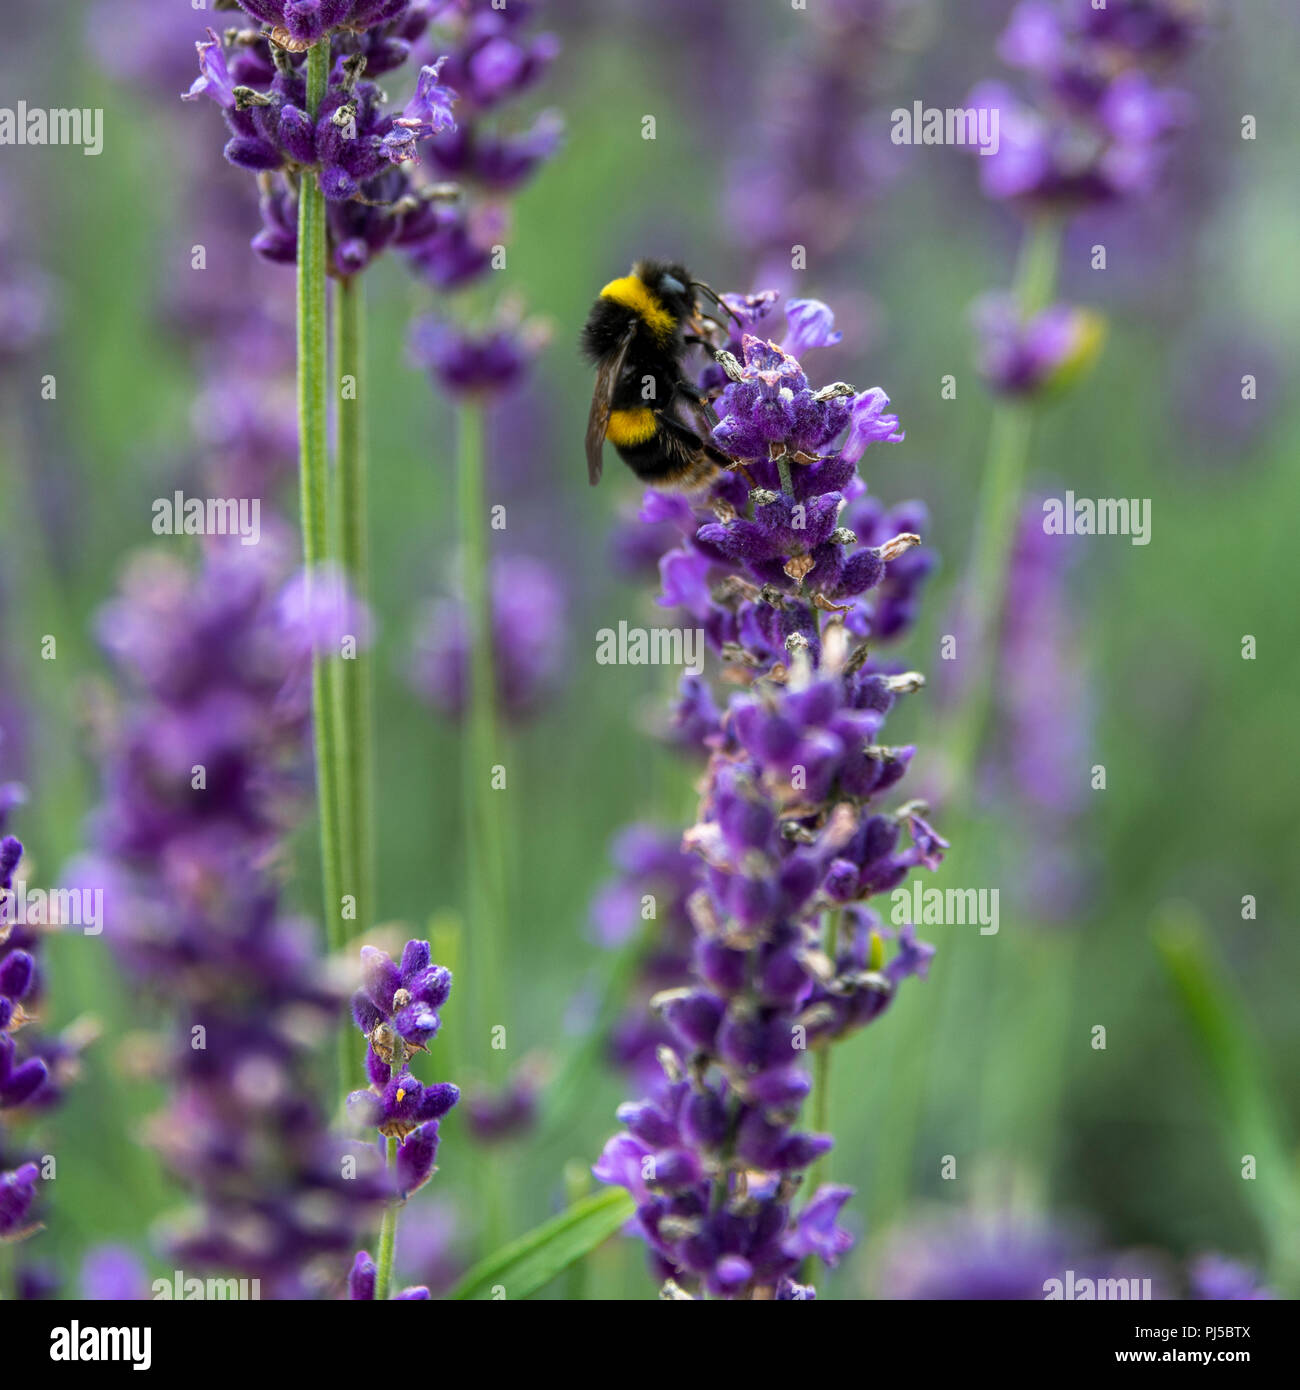 Banded white-tailed bumblebee on lavender flower. Probably a Garden bumblebee (Bombus hortorum) on a flower of English lavender. L. angustifolia. Stock Photo